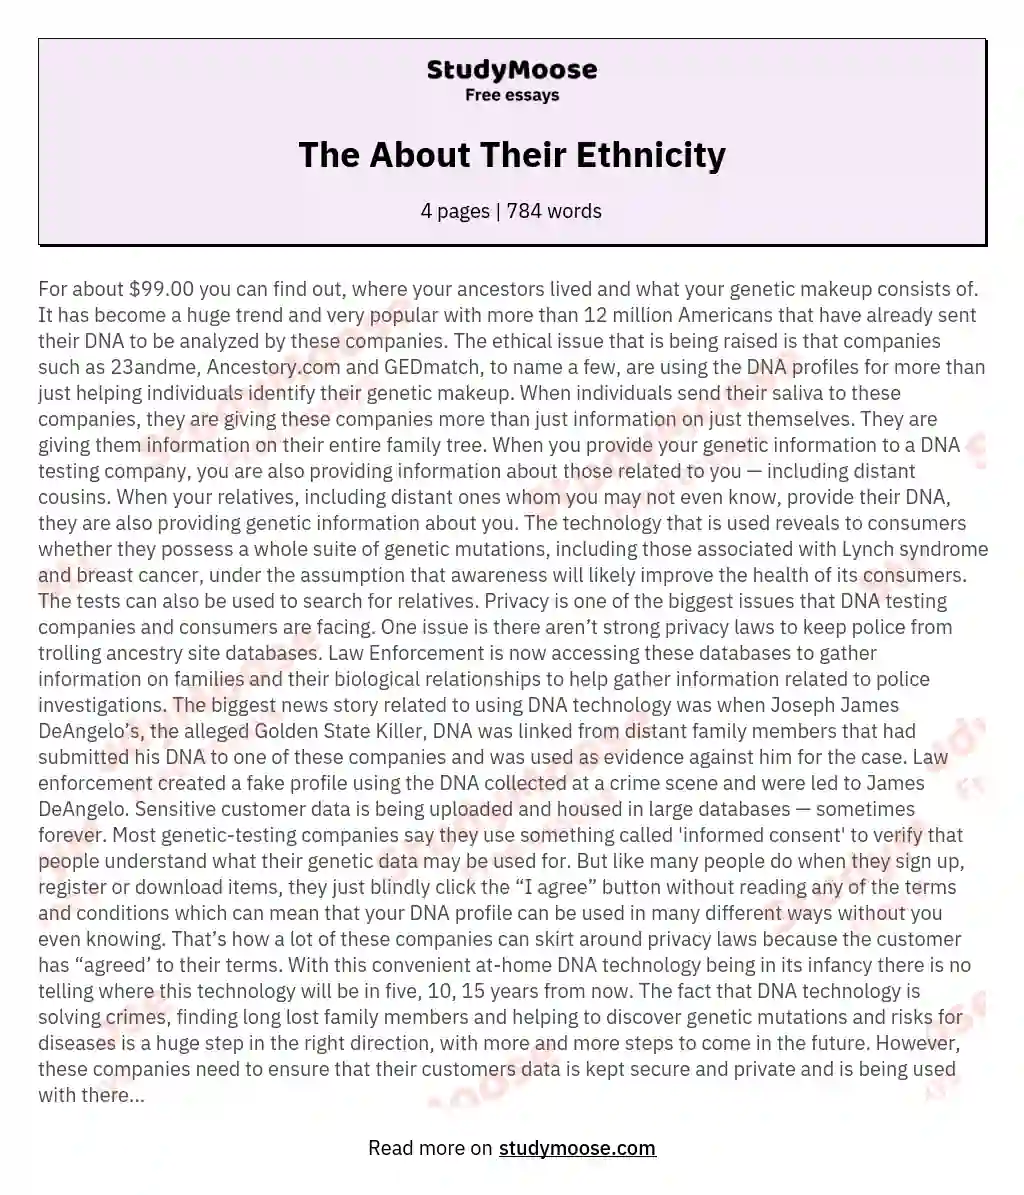 The About Their Ethnicity essay